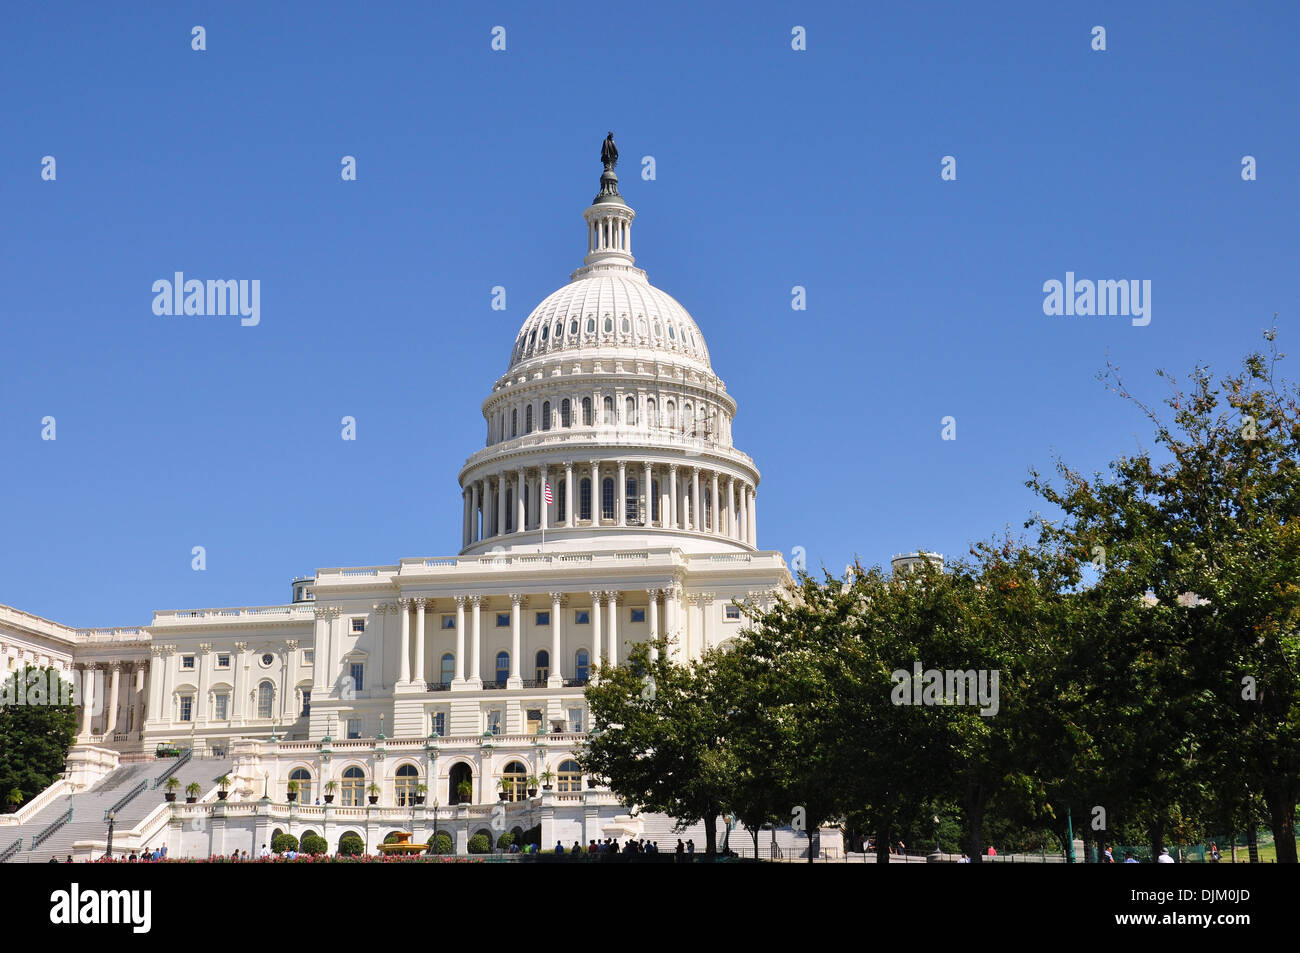 The Capitol of the United States of America in Washington, D.C. Stock Photo